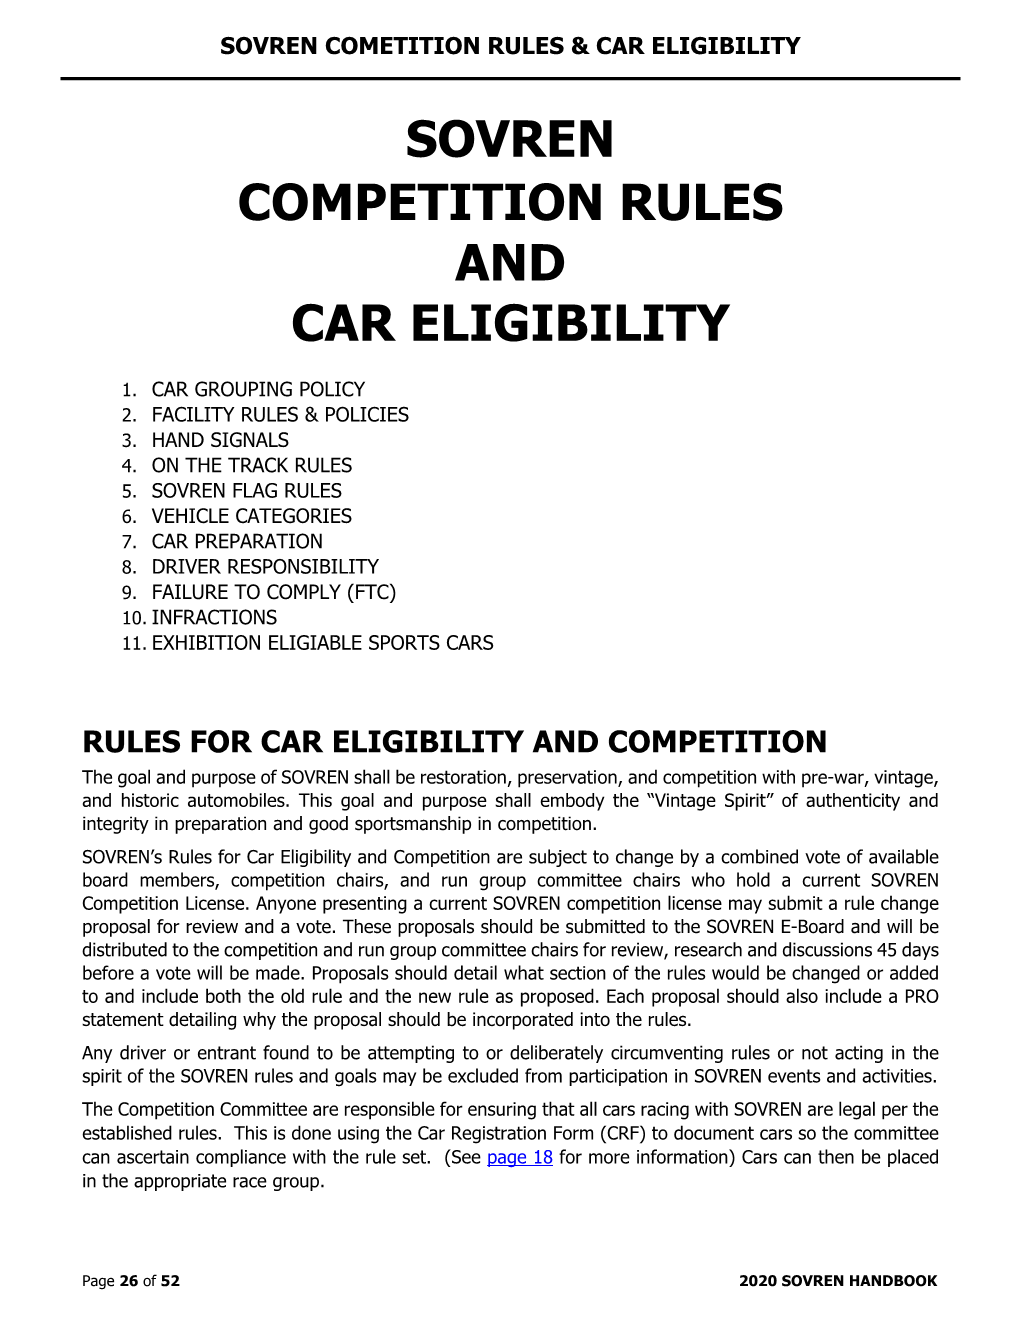 Sovren Competition Rules and Car Eligibility